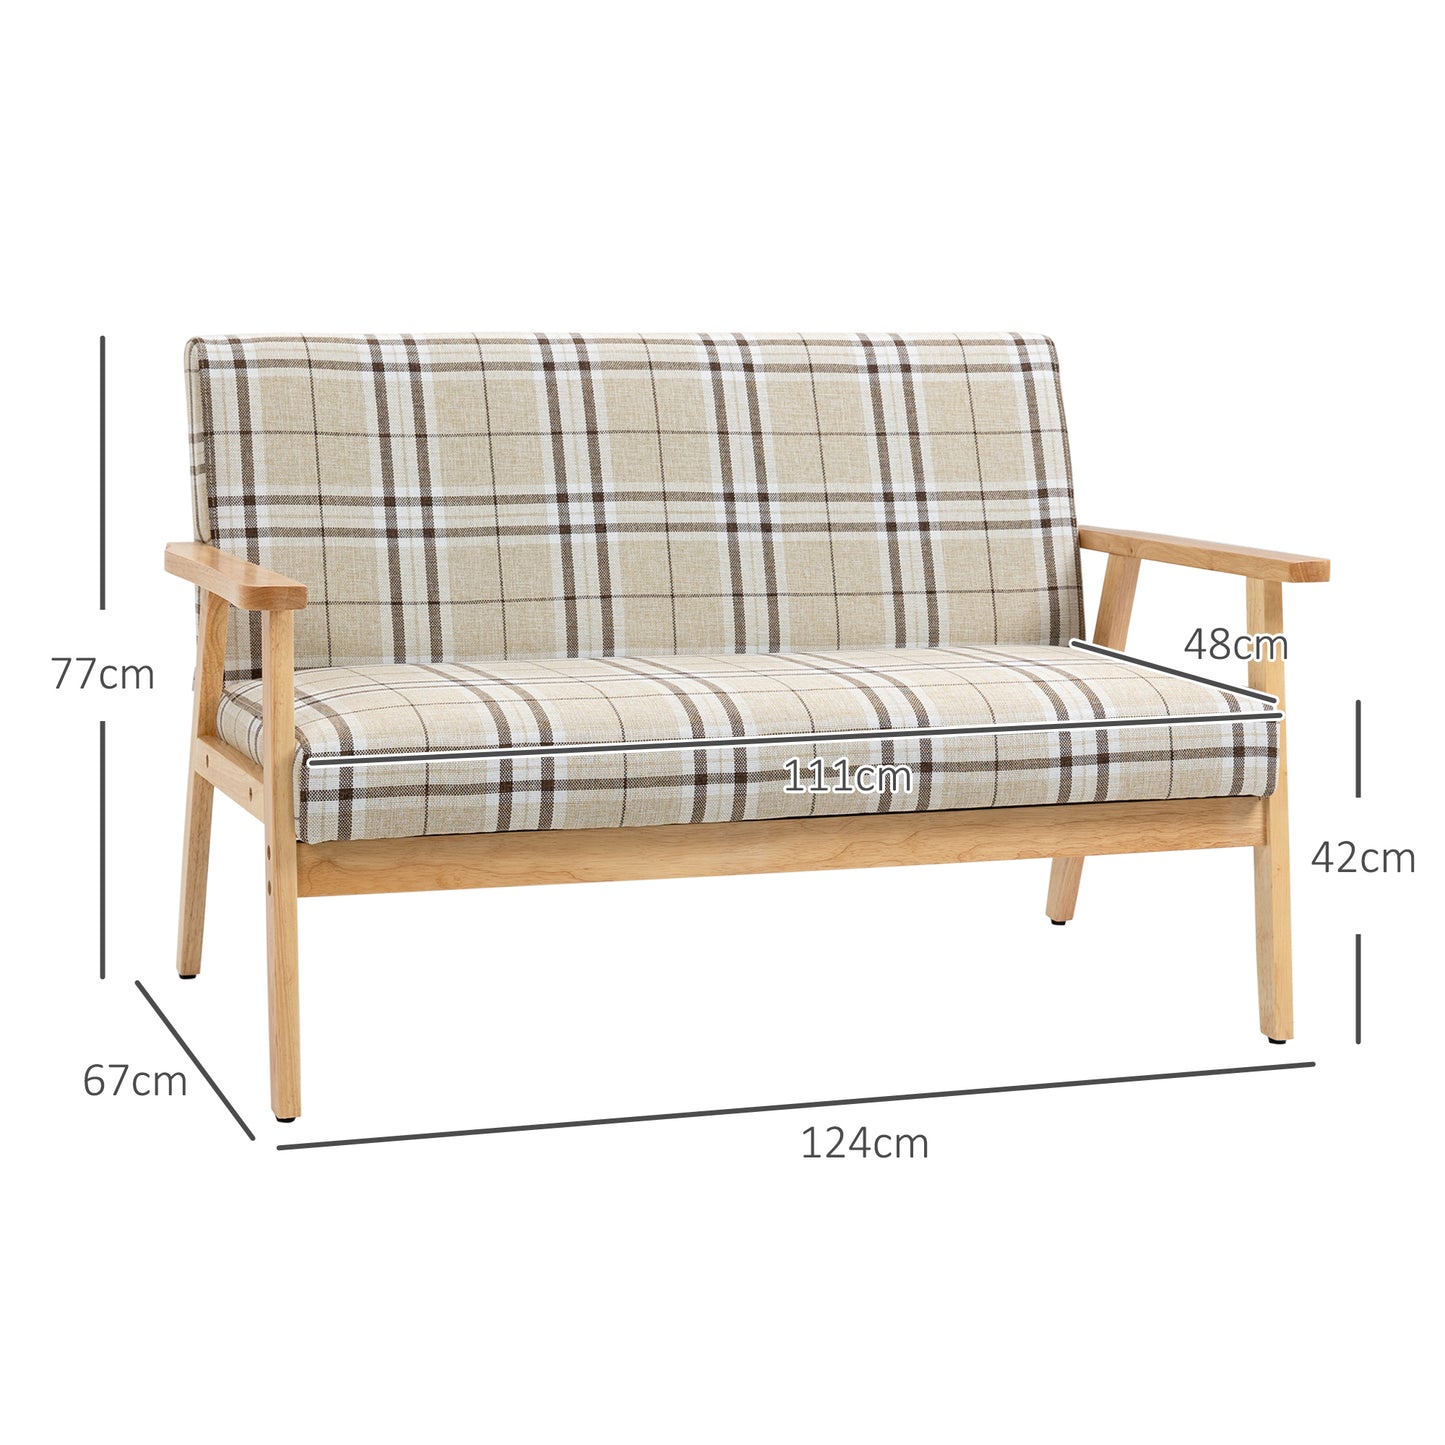 HOMCOM Compact Loveseat Couch Double Seat Sofa with Lattice Pattern and Rubber Wood Frame Beige and Coffee